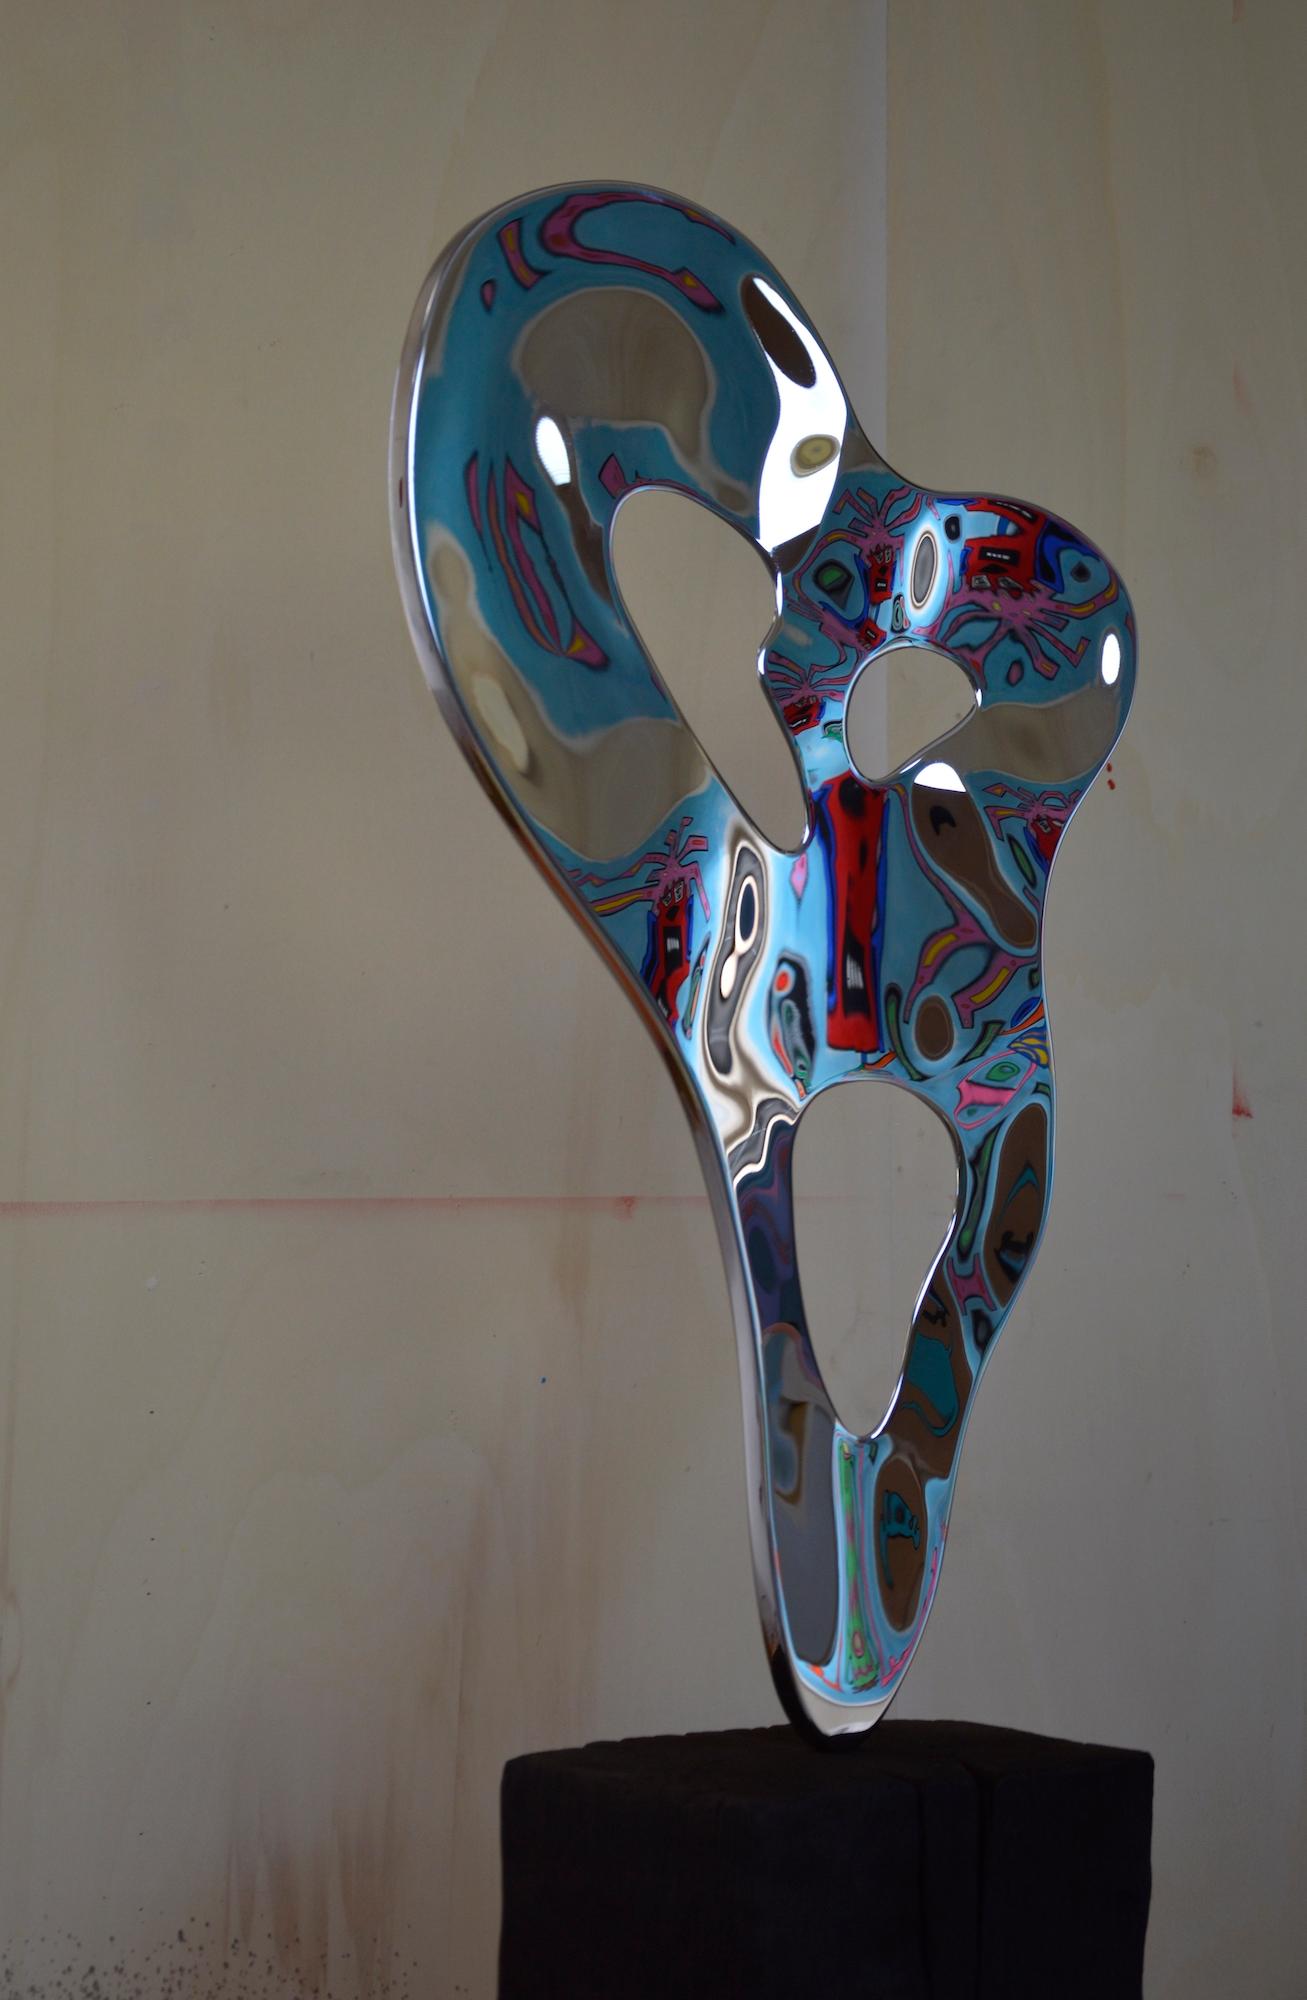 Ectoplasm II by Franck K - Stainless steel sculpture, reflections, light, vision For Sale 1